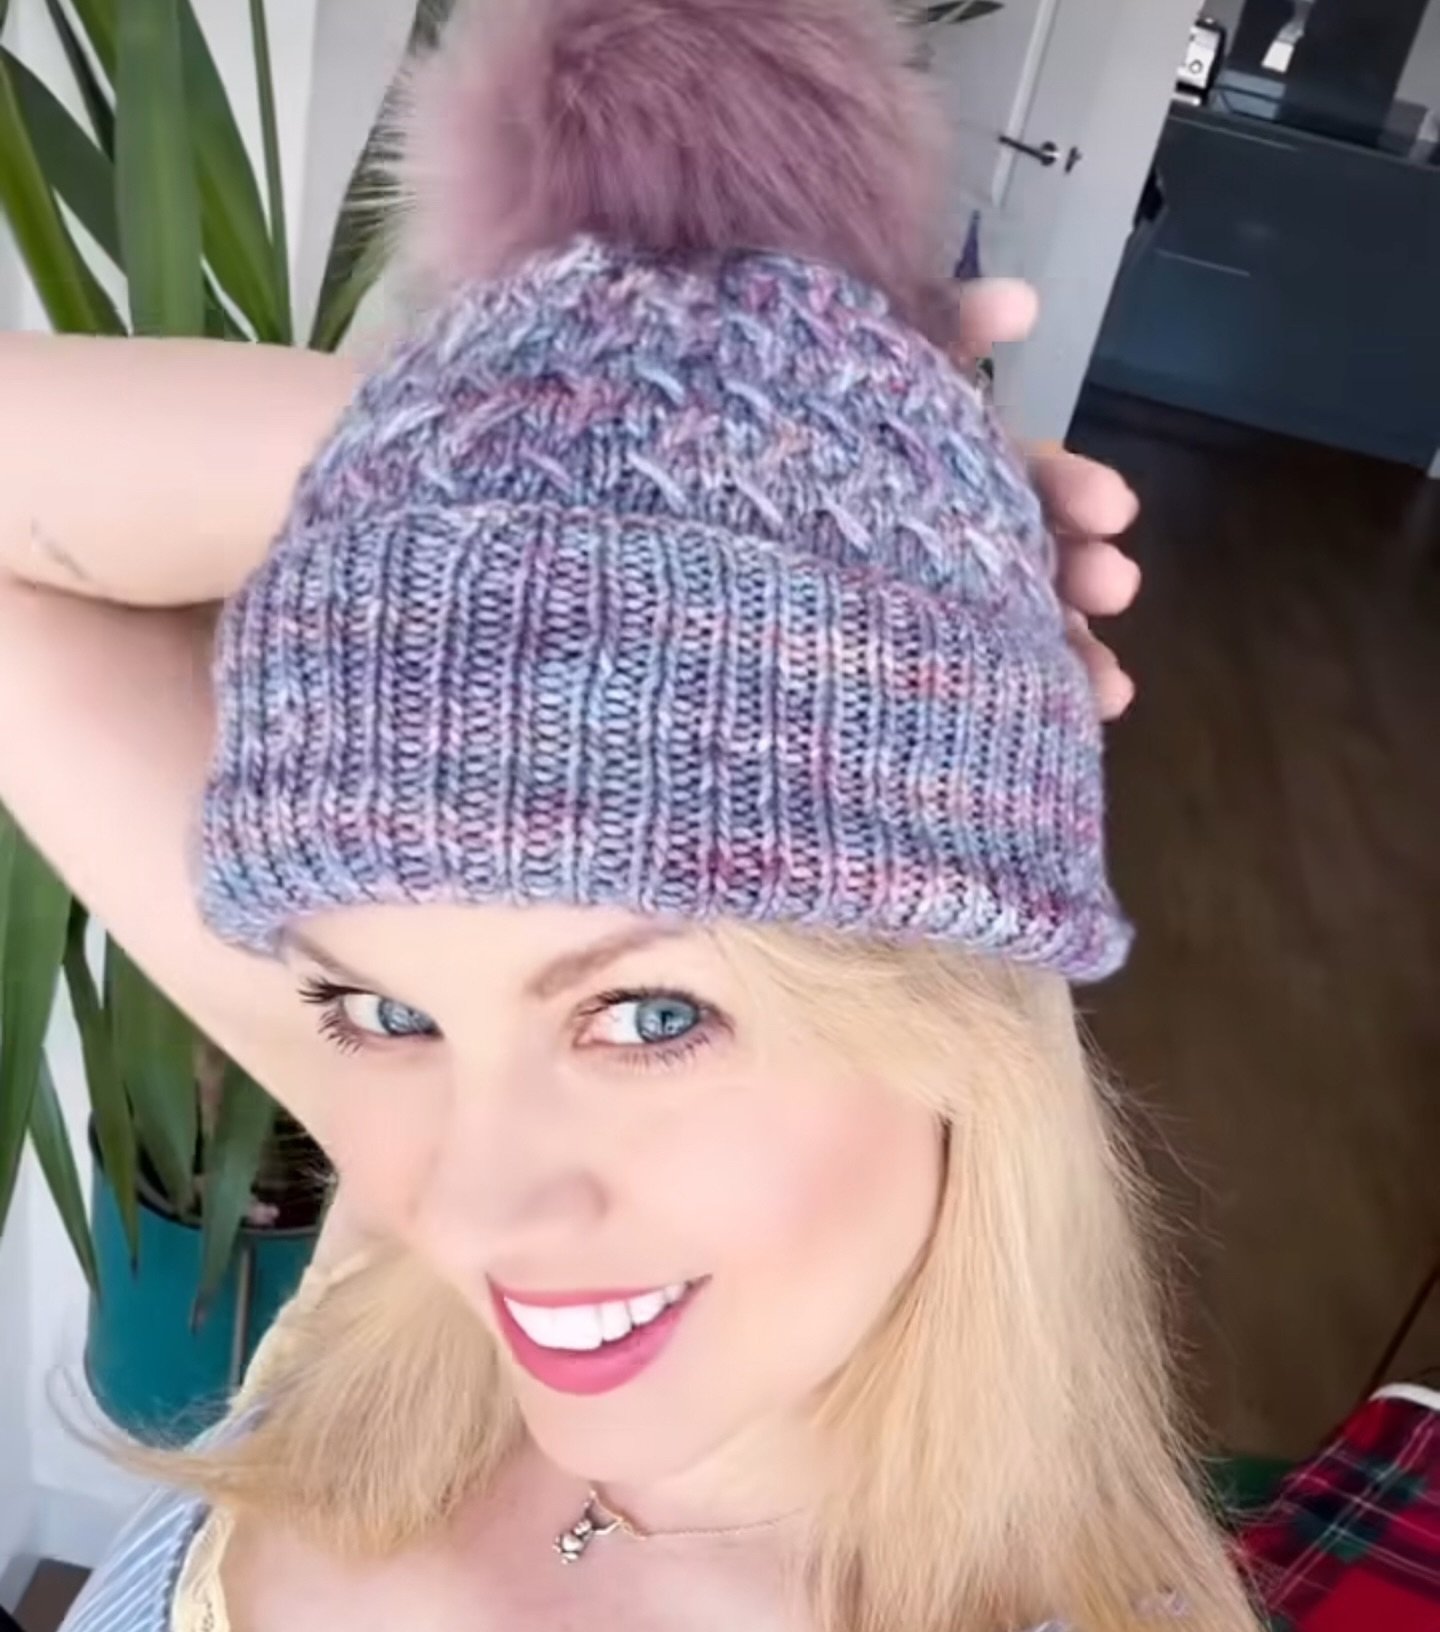 Well it&rsquo;s not very often a Strictly Star knits with my yarn! 💃 

Doesn&rsquo;t @realjoanneclifton look amazing in this Bristlecone Hat?! 

Our mutual friend @scottymcscot taught Joanne to knit while they worked on the Shrek tour and I think th